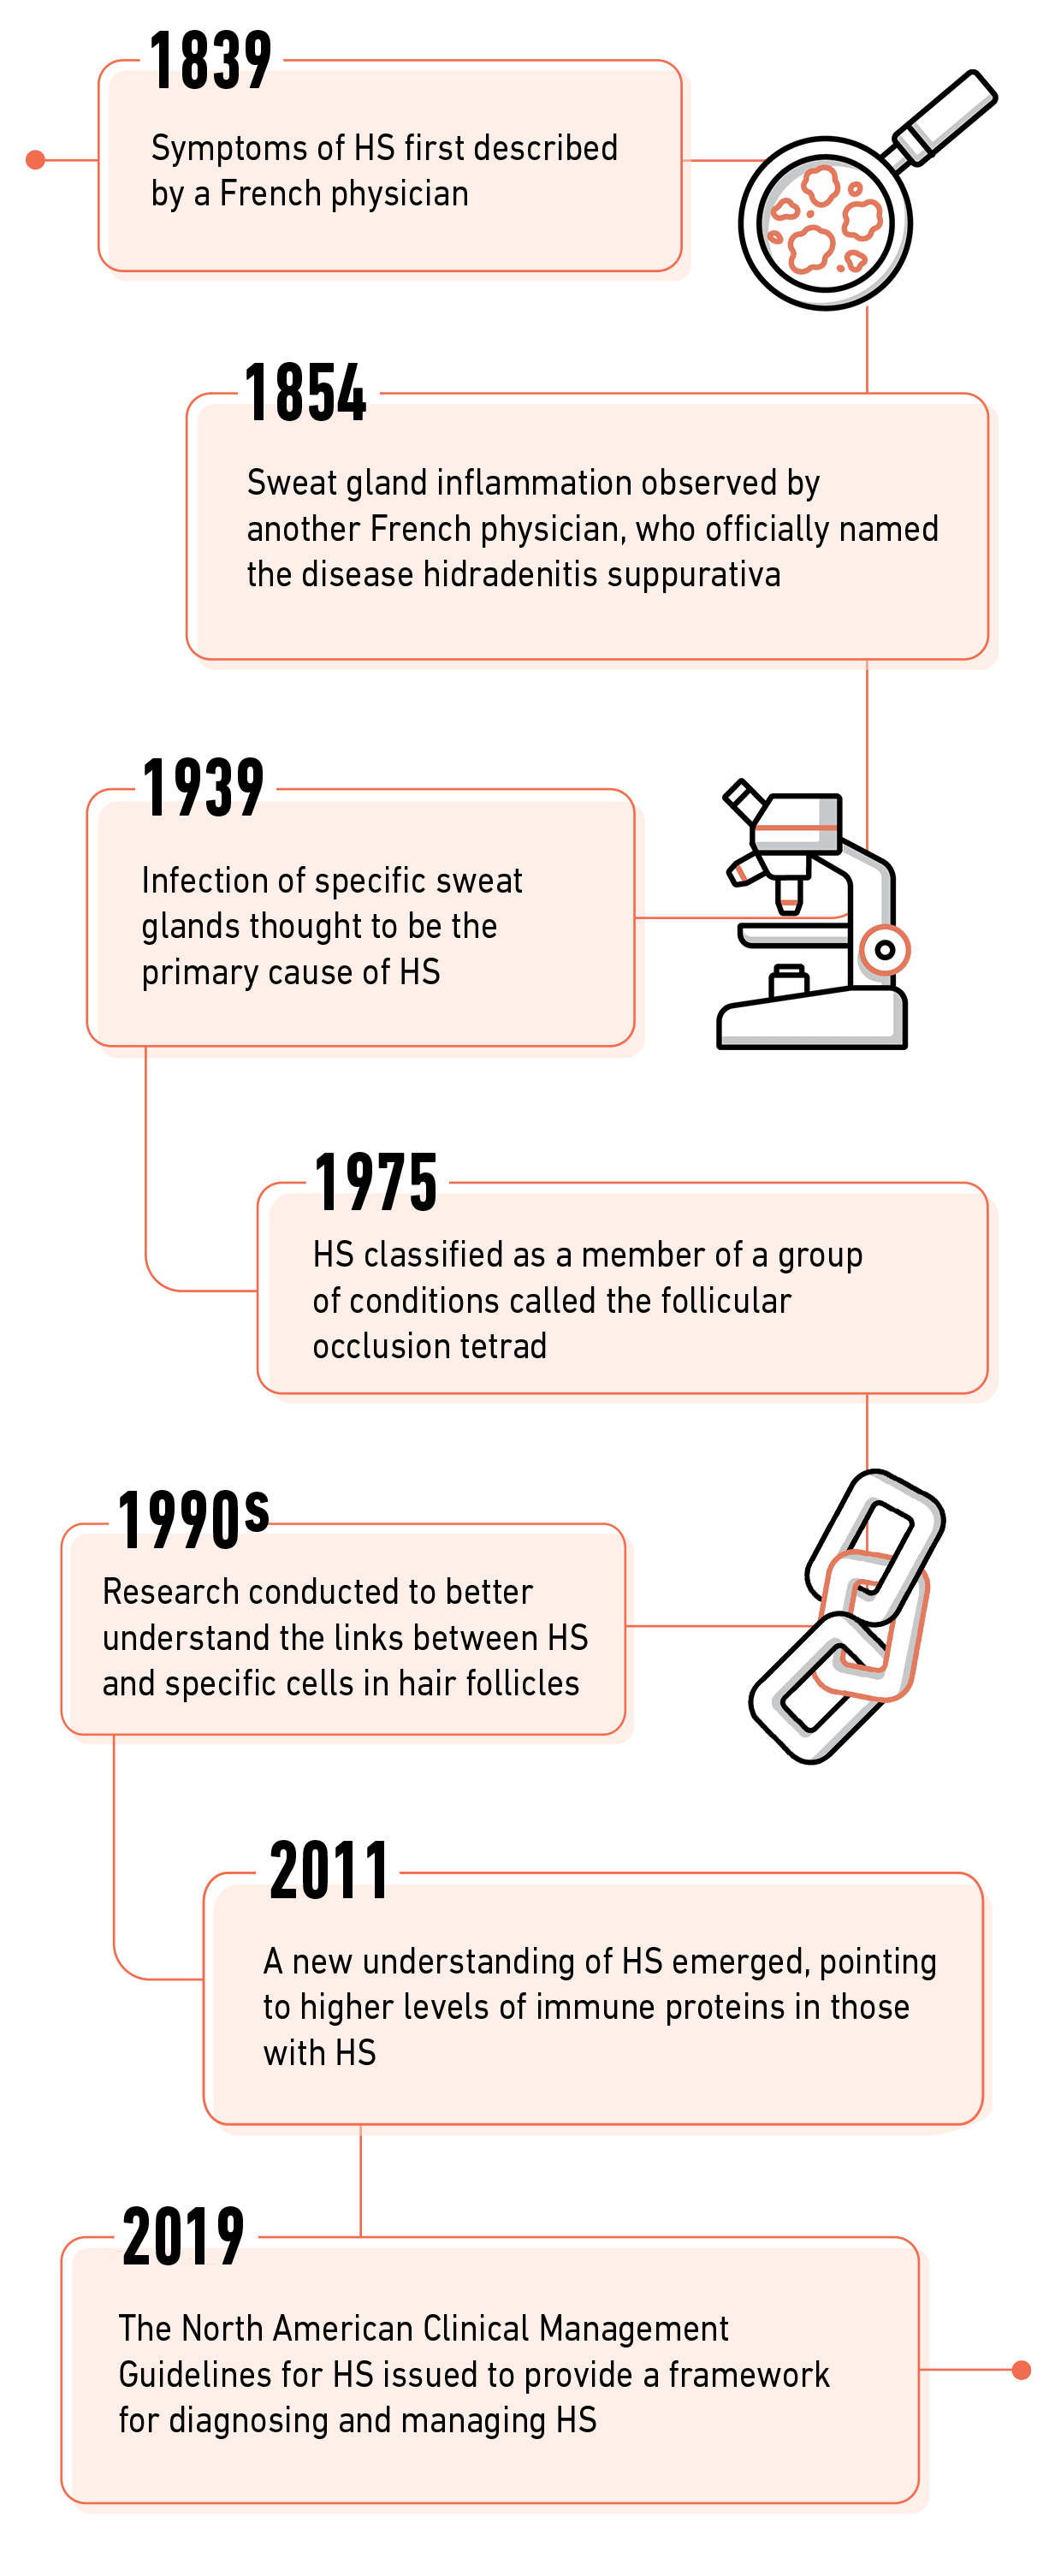 Illustrated timeline showing the history of HS from 1839 when symptoms were first described, to 2019 where treatment guidelines were issued